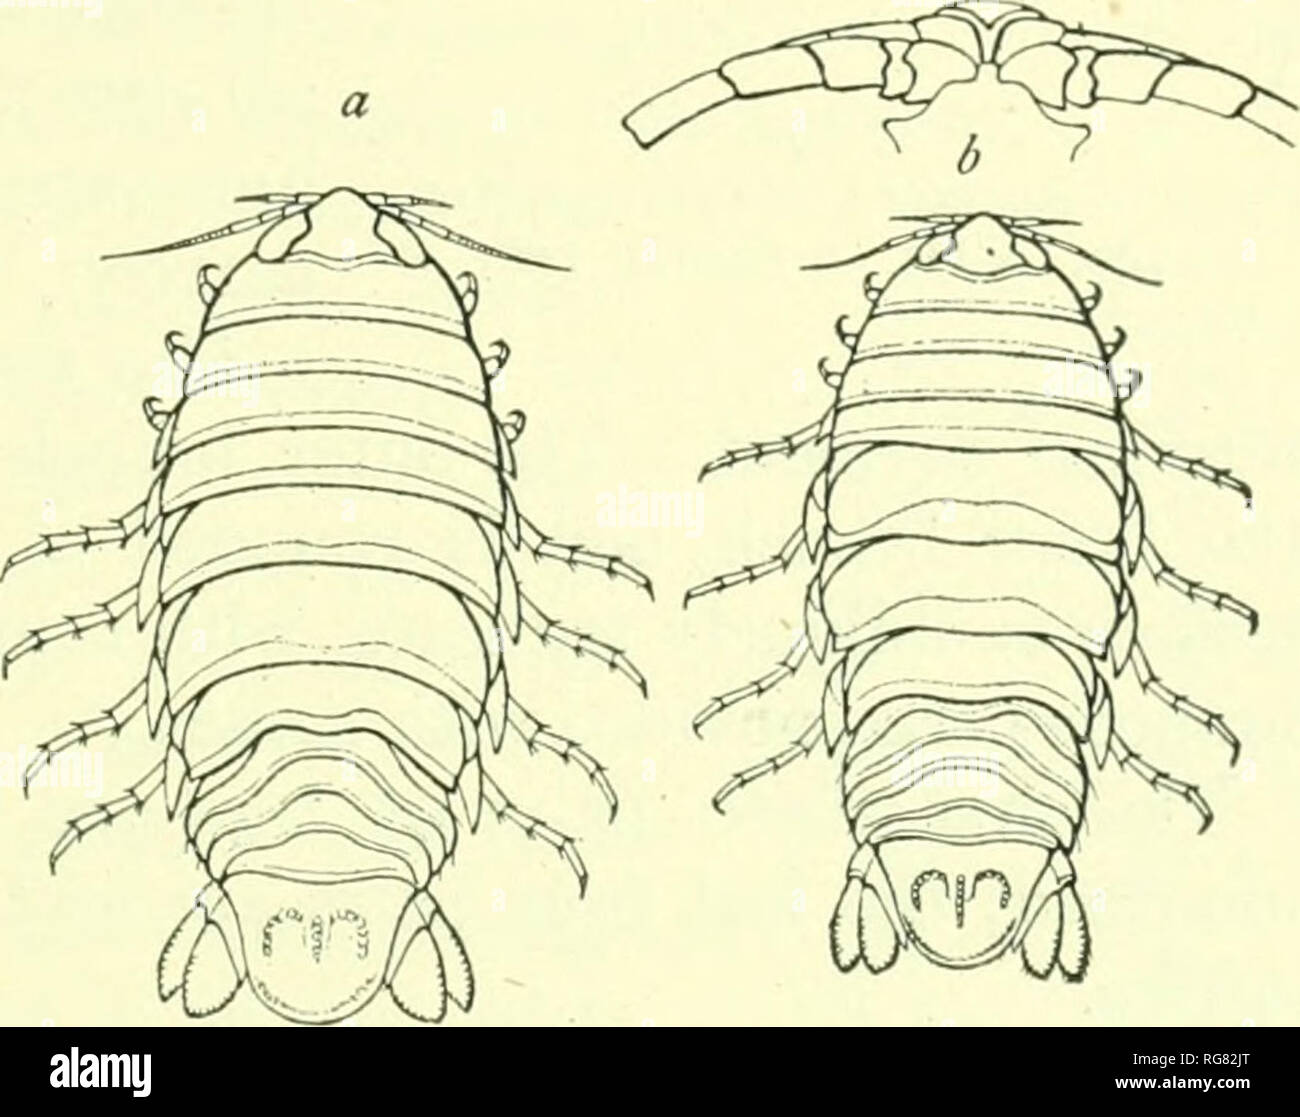 . Bulletin - United States National Museum. Science. ISOPODS OF NORTH AMERICA. 209 ROCINELA SIGNATA Schioedte and Meinert. Roelnela signata ScnitEUTE and ]Ii:iert, Naturhistorisk Tidsskrift (3), XII, 1879-80, pp. 899-401, pi. xiii, figs. 3-6.âRichardson, Pnx-. 1'. S. Nat. Mus., XXIII, 1901, p. 524.âMooKE, P.ull. V. S. Fish Coinin., XX, Pt. 2, 1902, p. 171, pi. X, fig. 2. Localities.âWest Indies; shores of Central Anierica; St. Croix Island; St. Bartholomew Island; Marco and No Name Key, Florida; between delta of tlie Mississippi and Cedar Ke3's, Florida; Key West, Florida; Anclote section; G Stock Photo